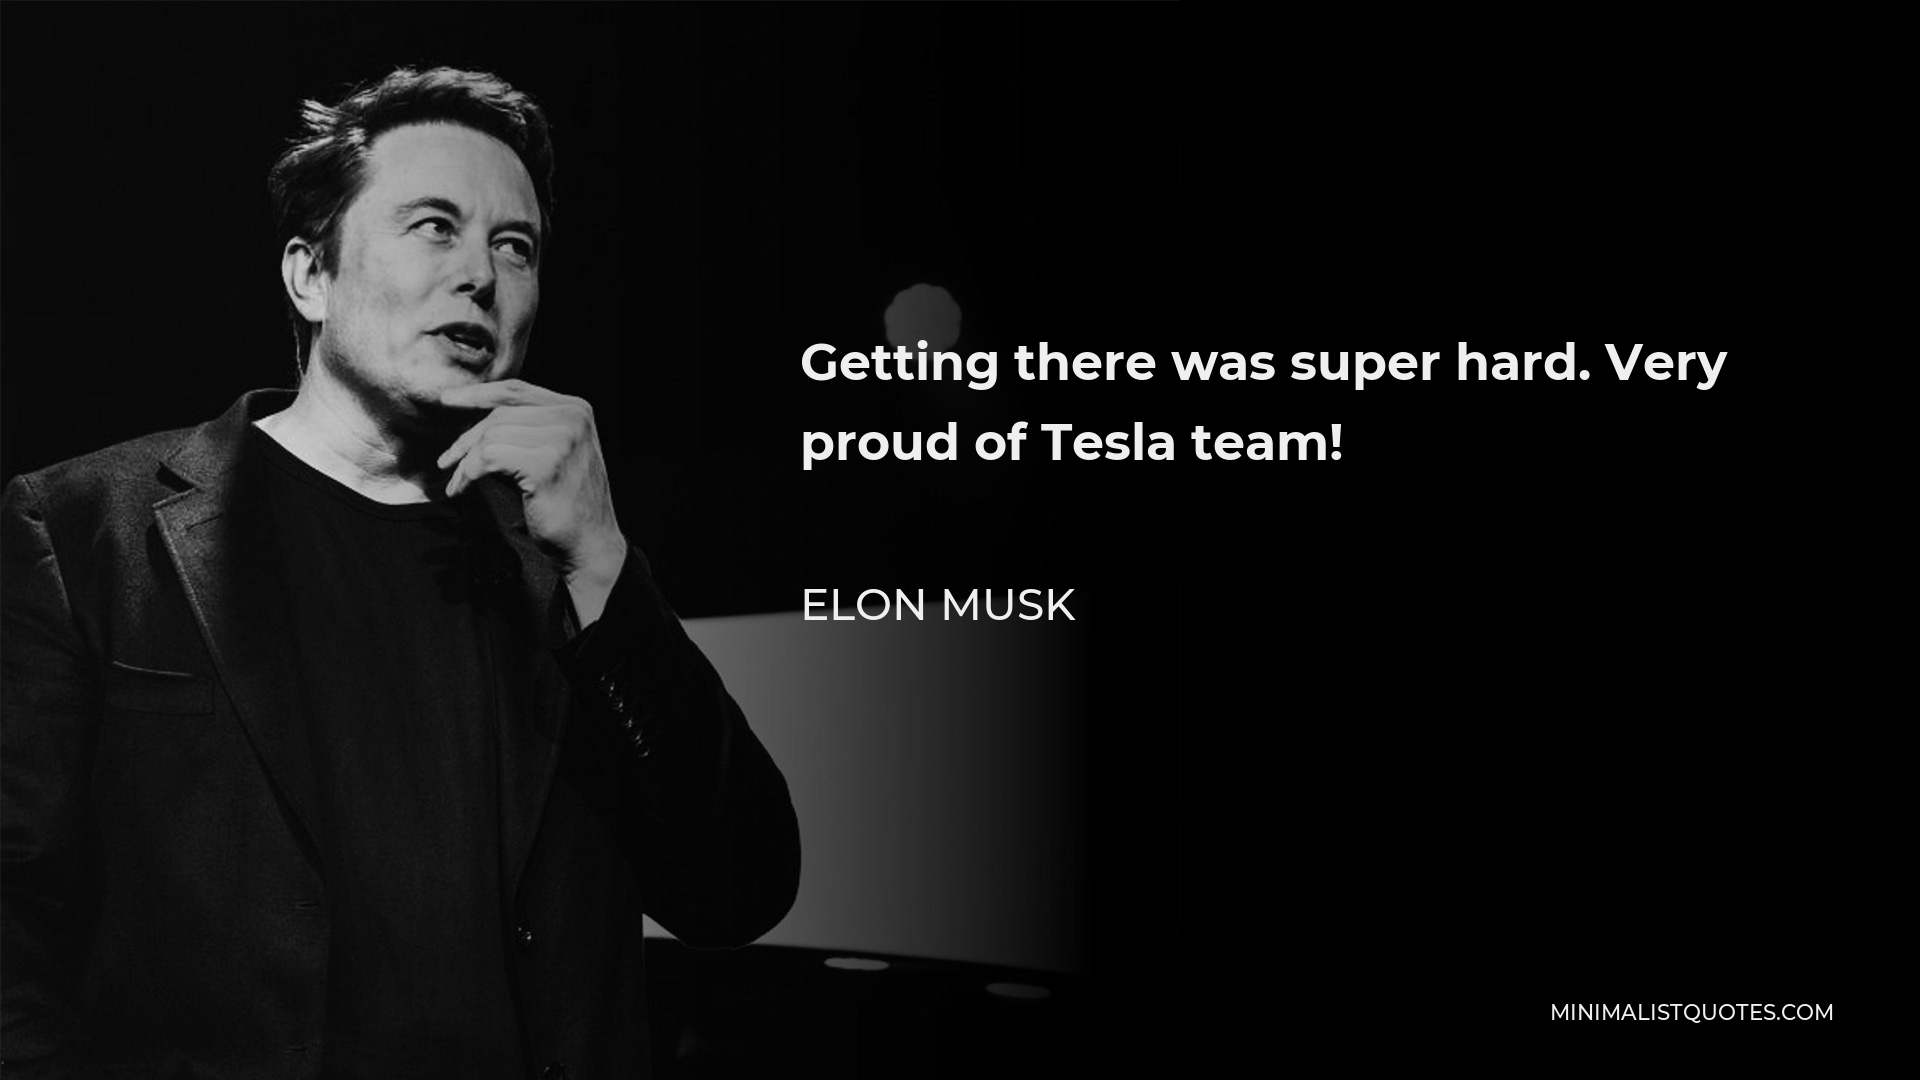 Elon Musk Quote - Getting there was super hard. Very proud of Tesla team!